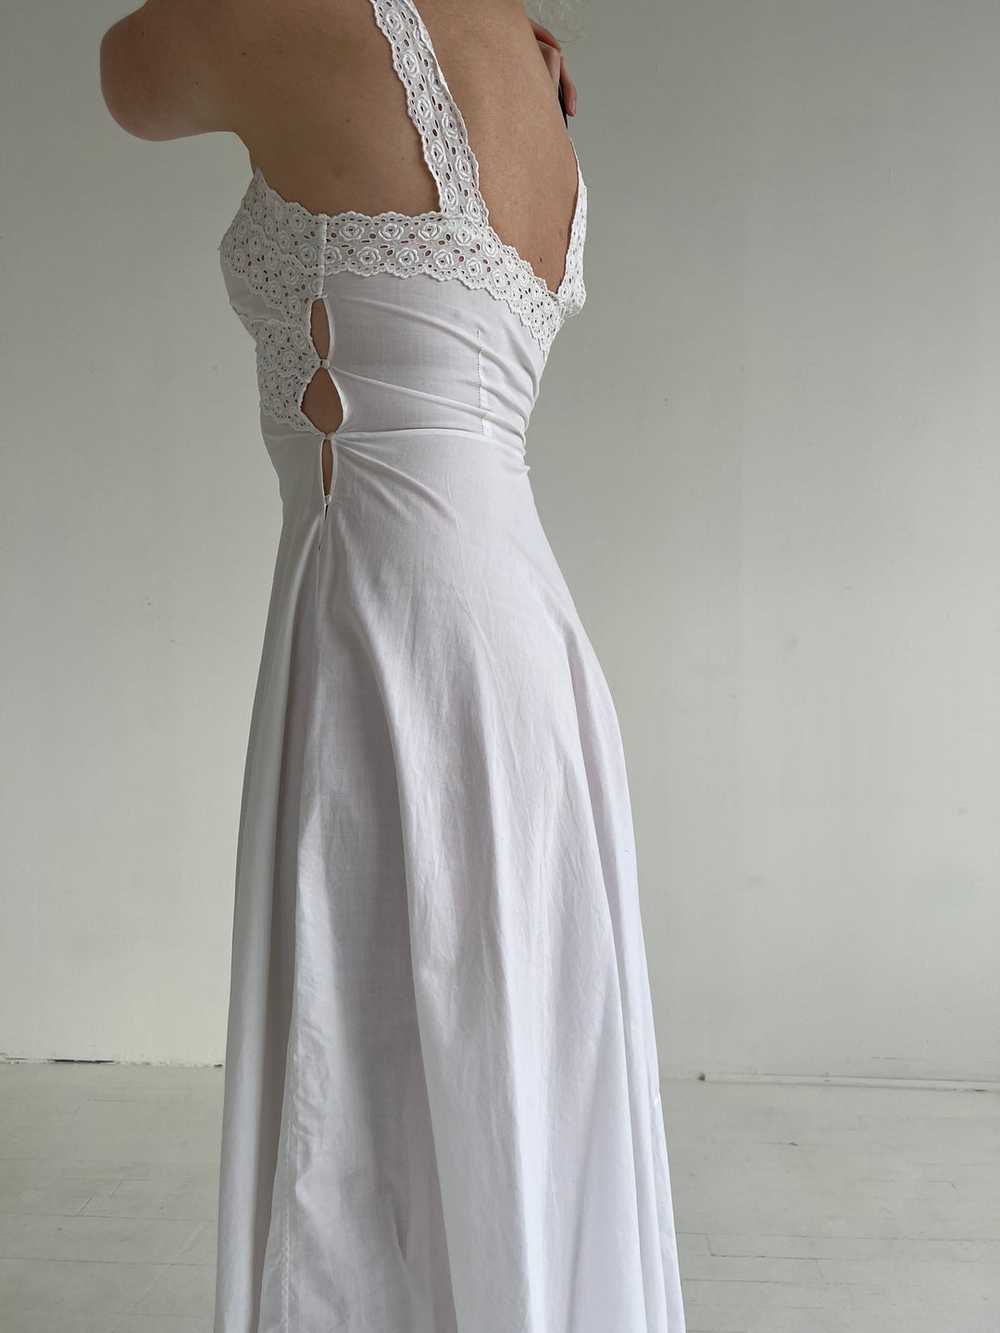 1970's Bridal White Cotton Dress with Lace - image 6